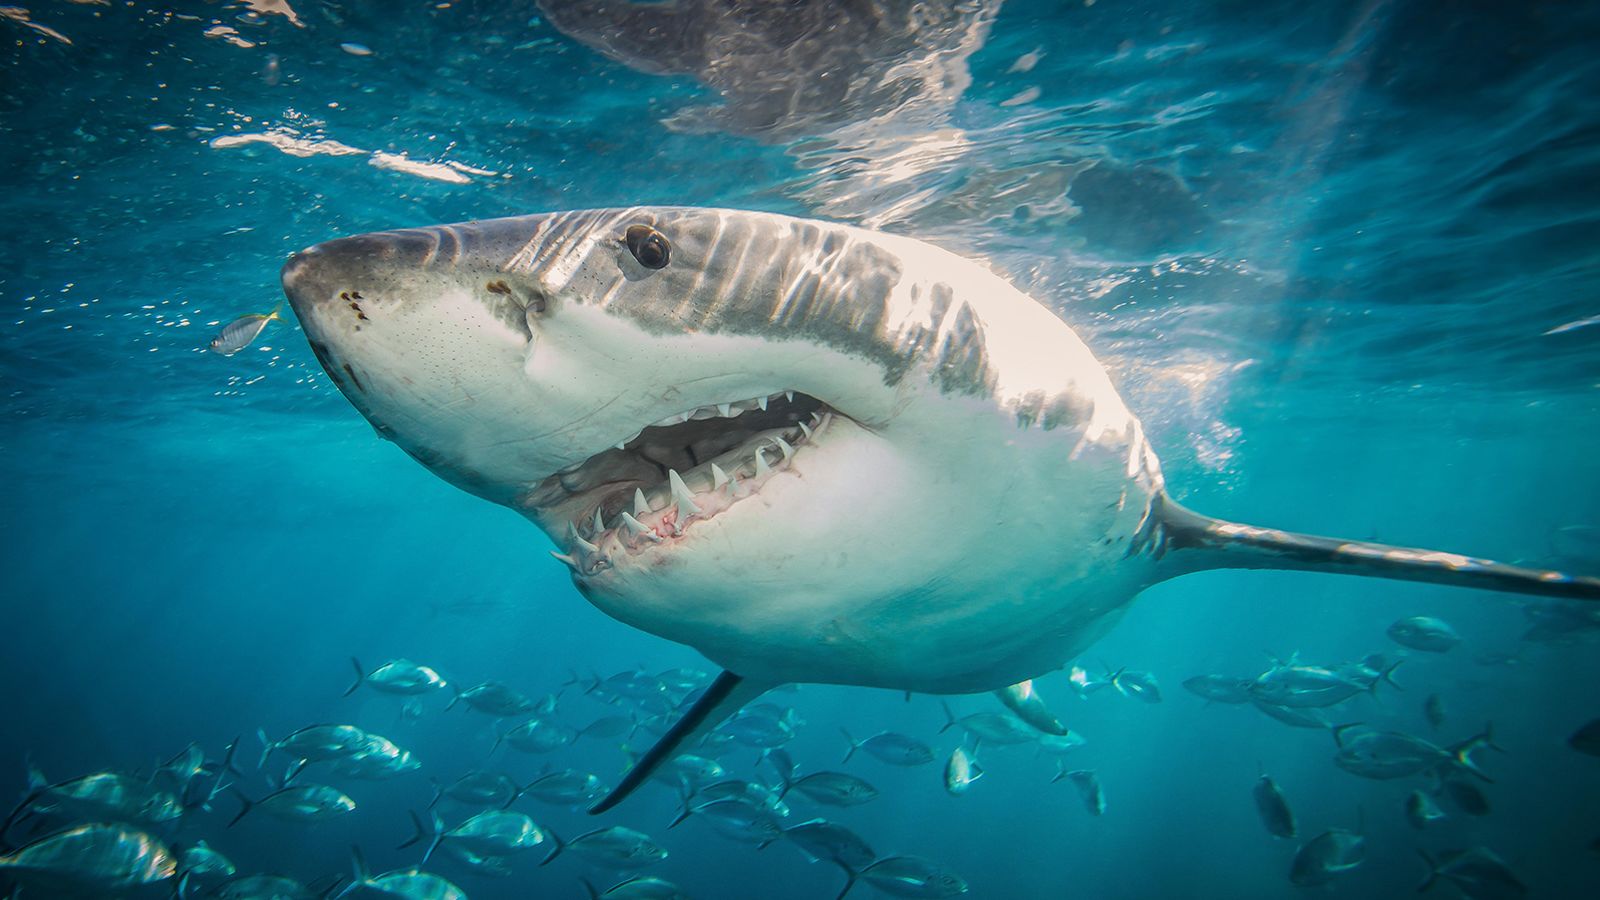 Which places in the world have the most sharks?